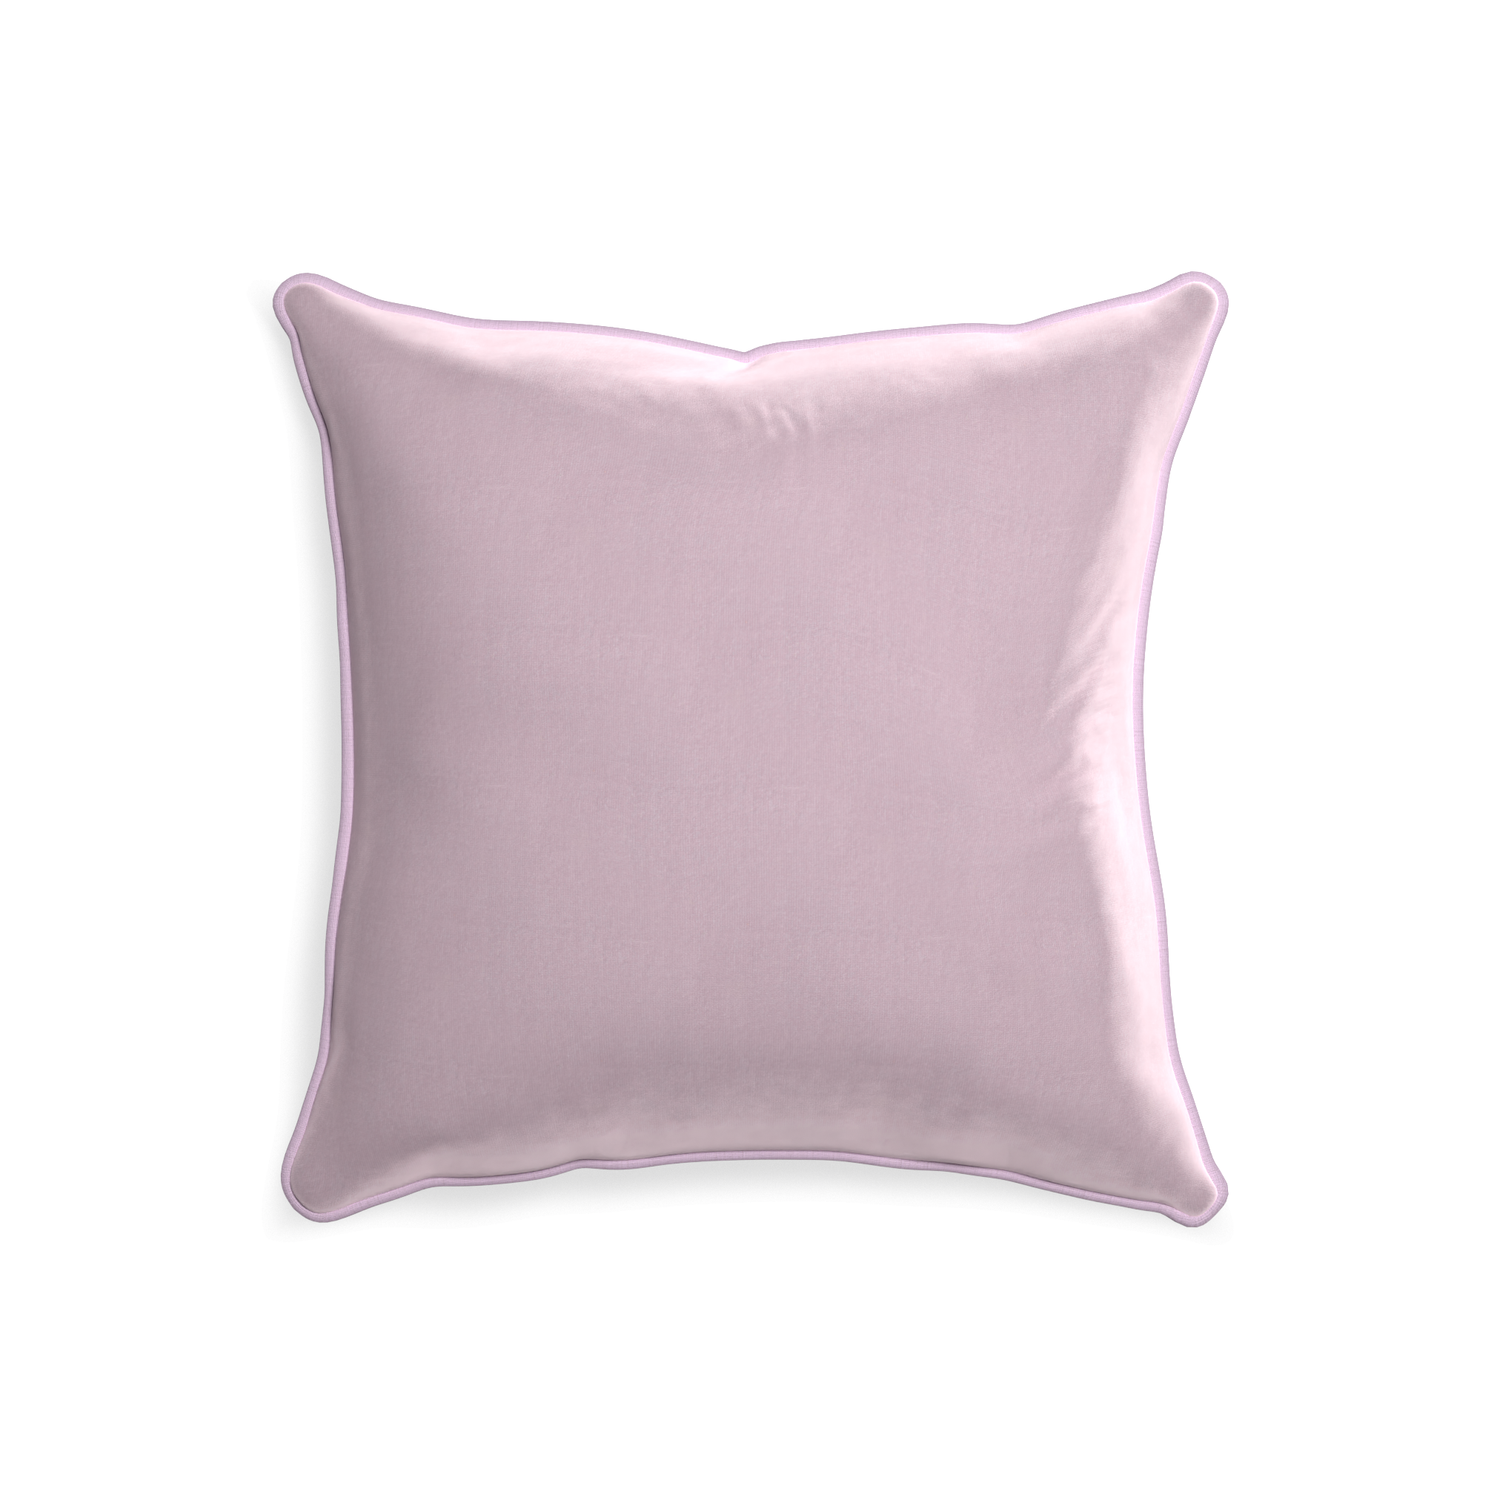 20-square lilac velvet custom pillow with l piping on white background